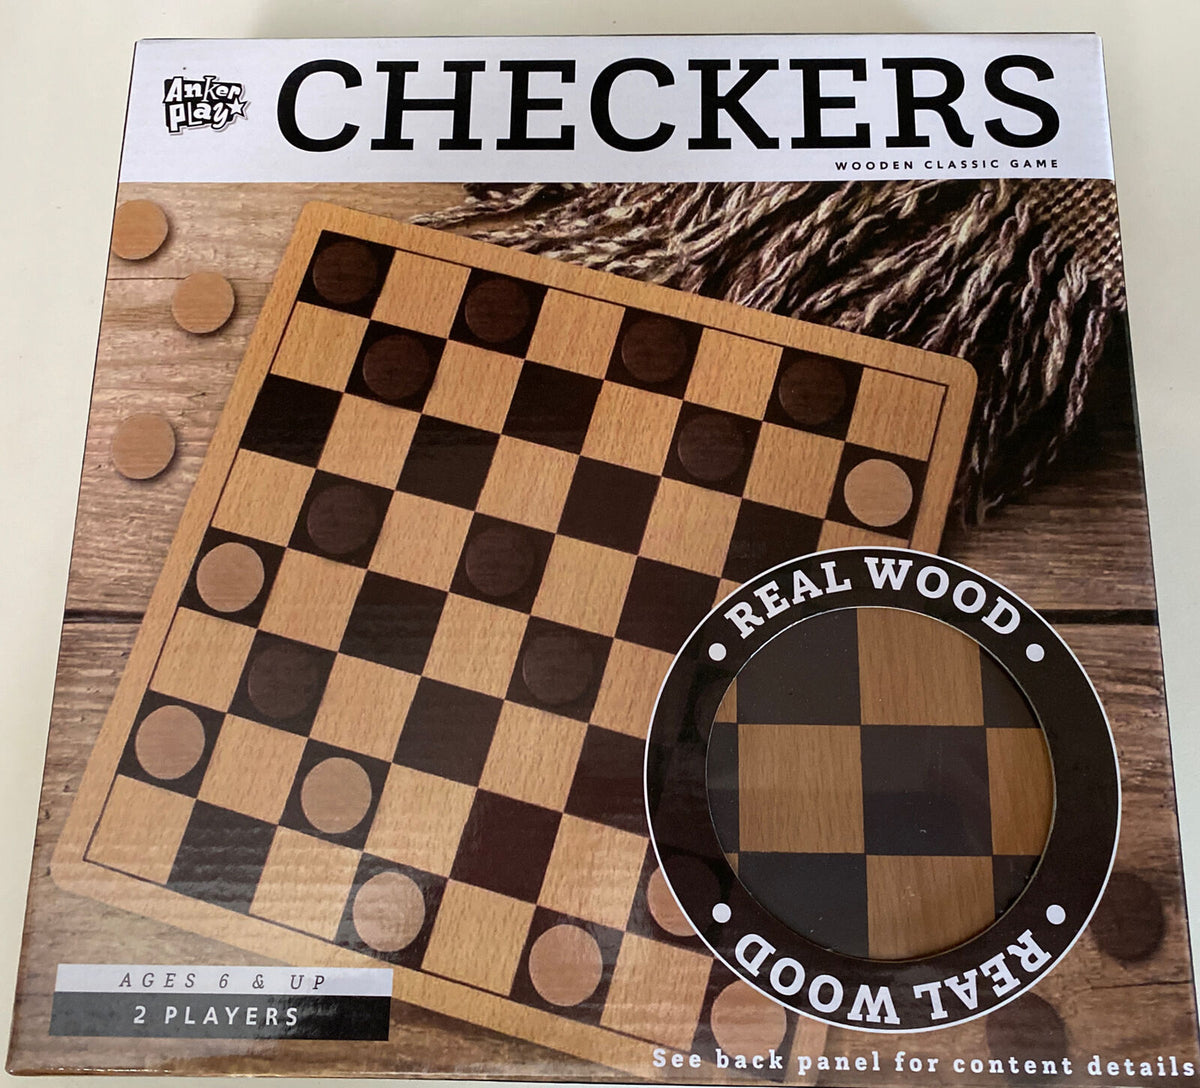 Checkers Wooden Classic